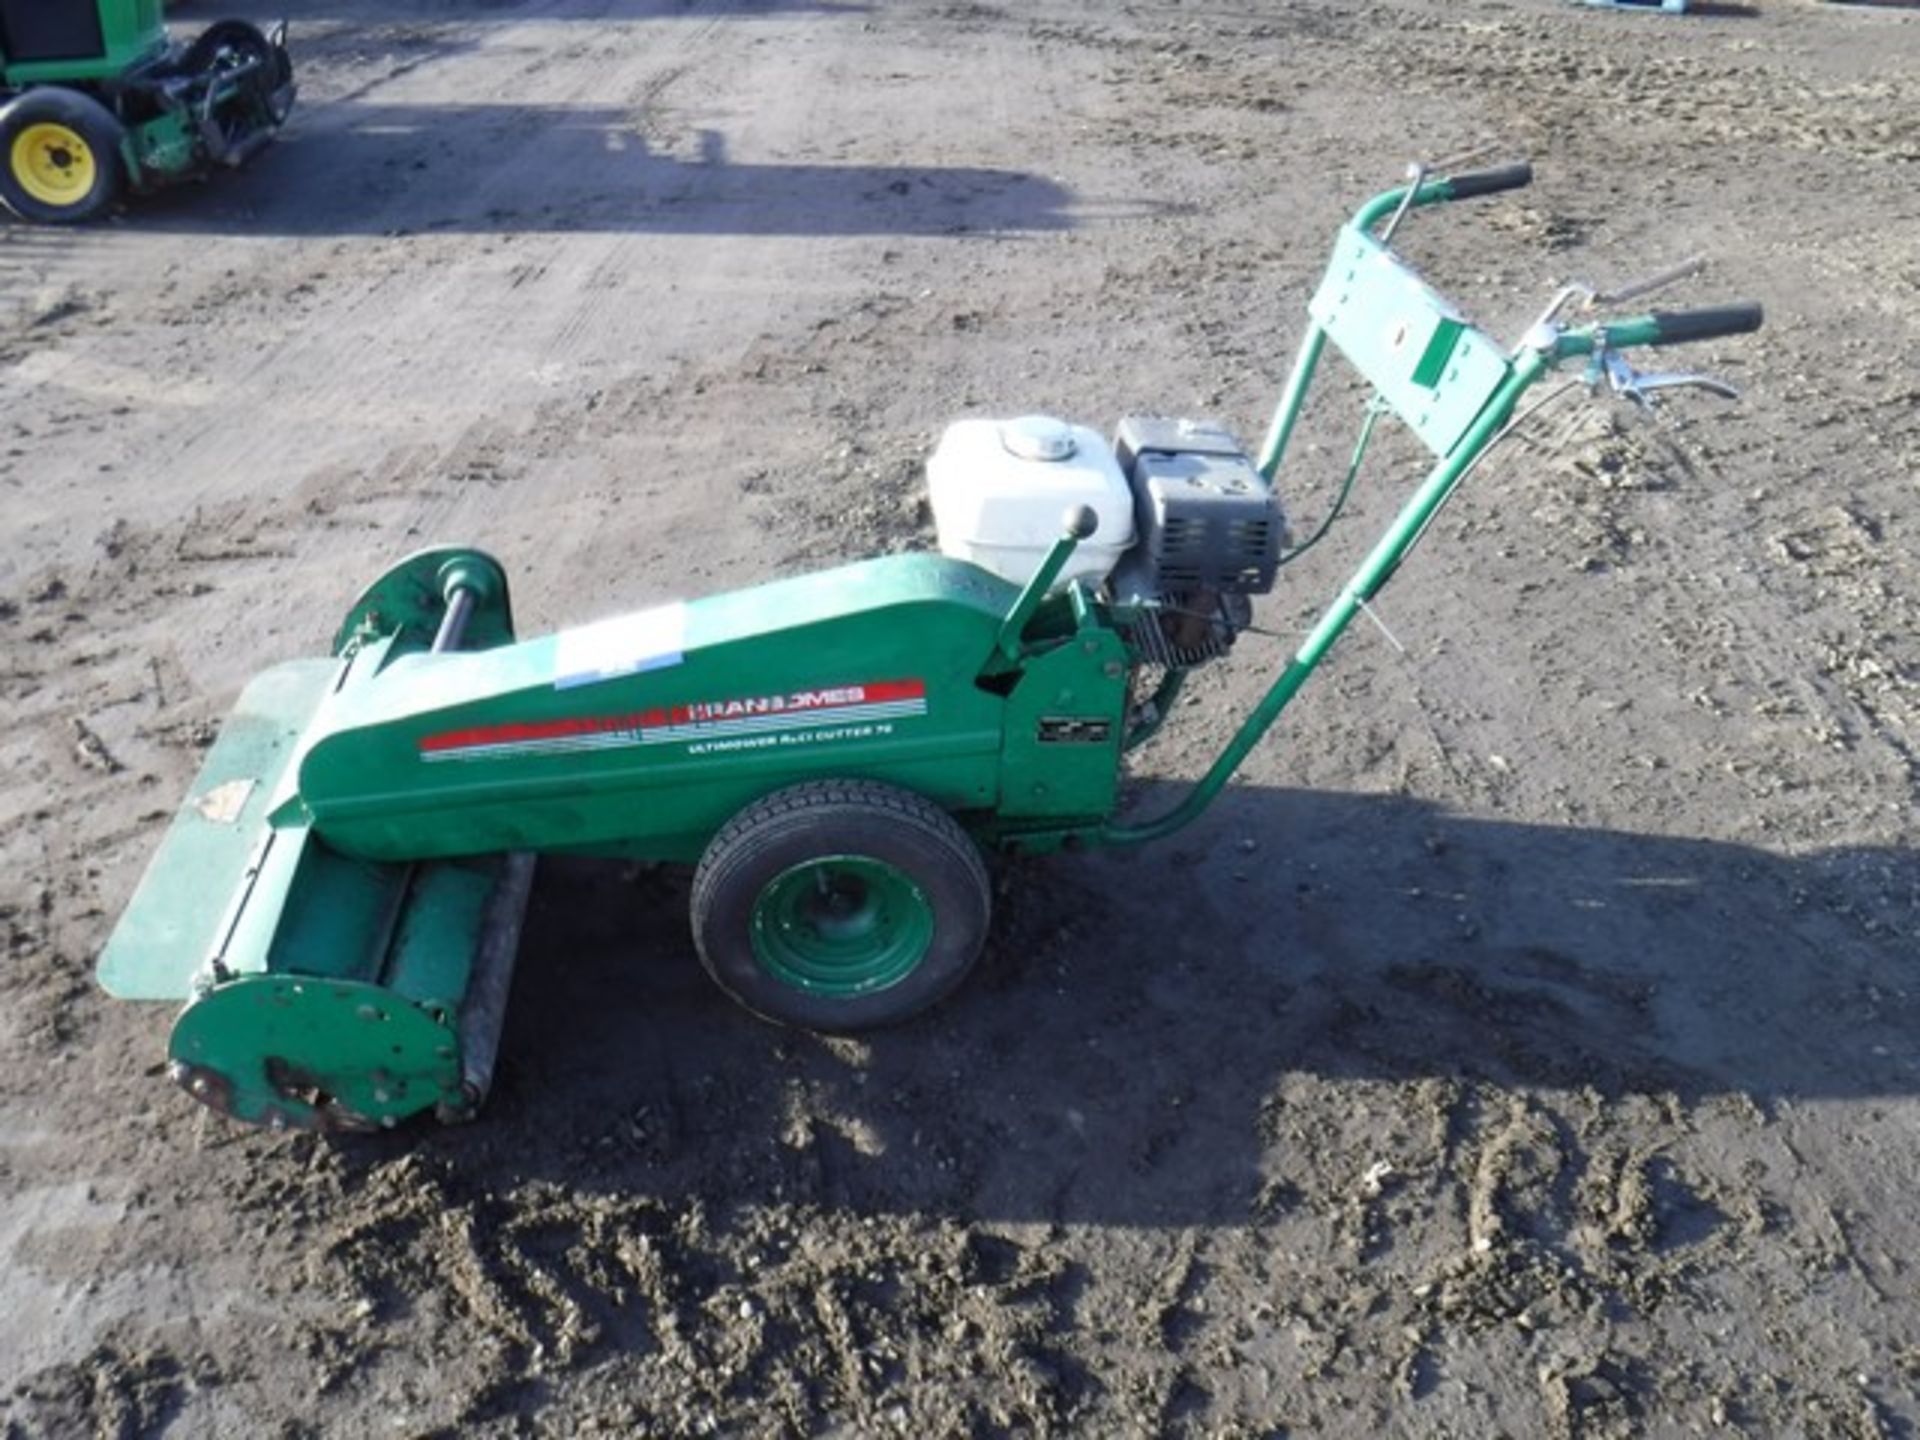 RANSOMES reelcutter withHonda GX250 petrol engine